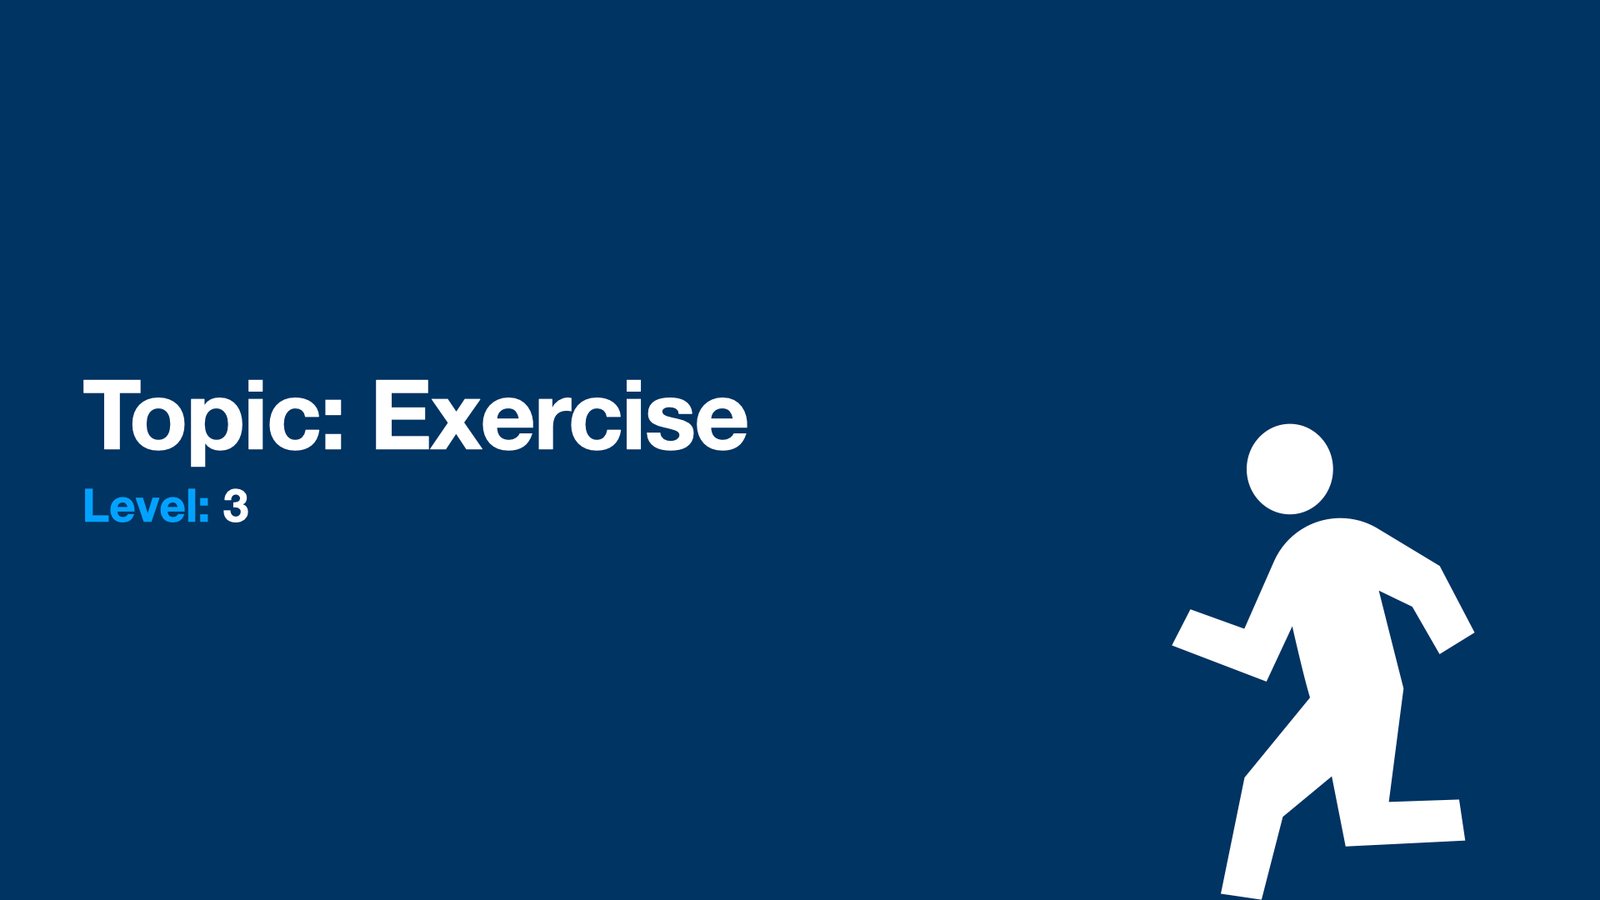 Engaging EFL Speaking Class on Exercise: Introducing Different Ways to ...